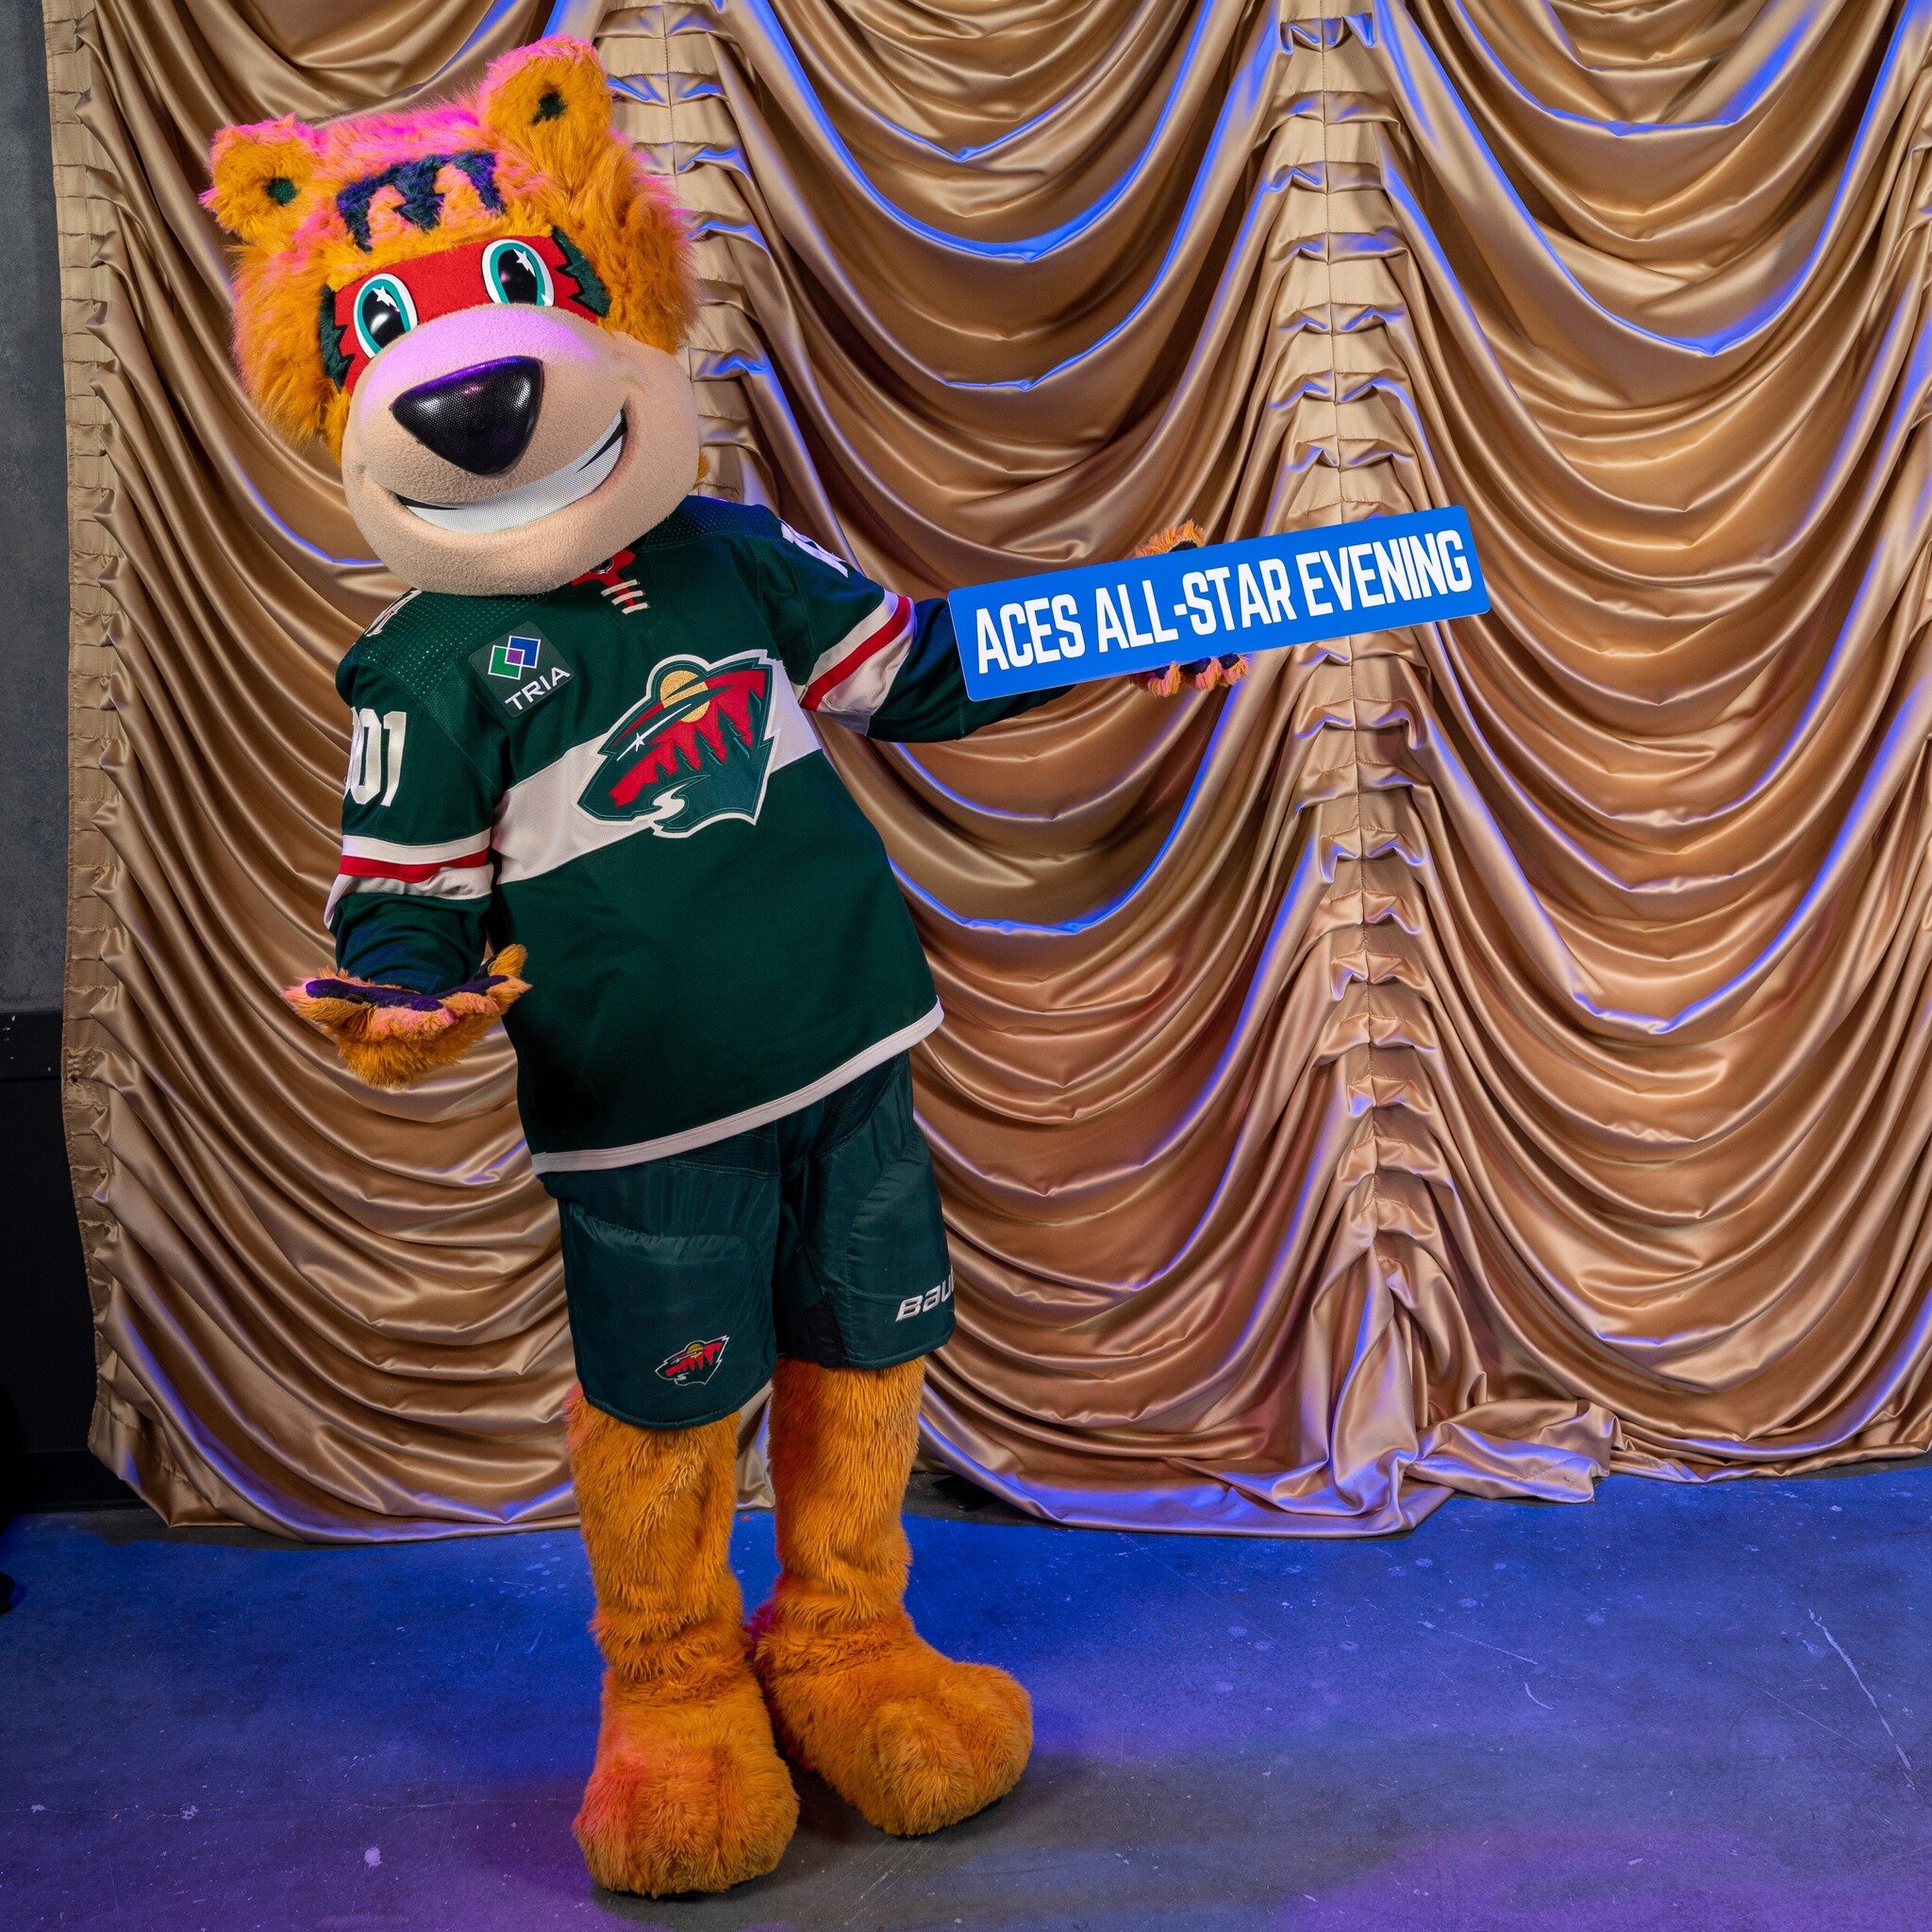 The @minnesotawild leave it all on the ice for Minnesota&rsquo;s hockey fans and students alike. We&rsquo;re cheering loud for our friends and partners as they drop the puck at their season opener! Let&rsquo;s go, Wild! 

In case you missed it: you c